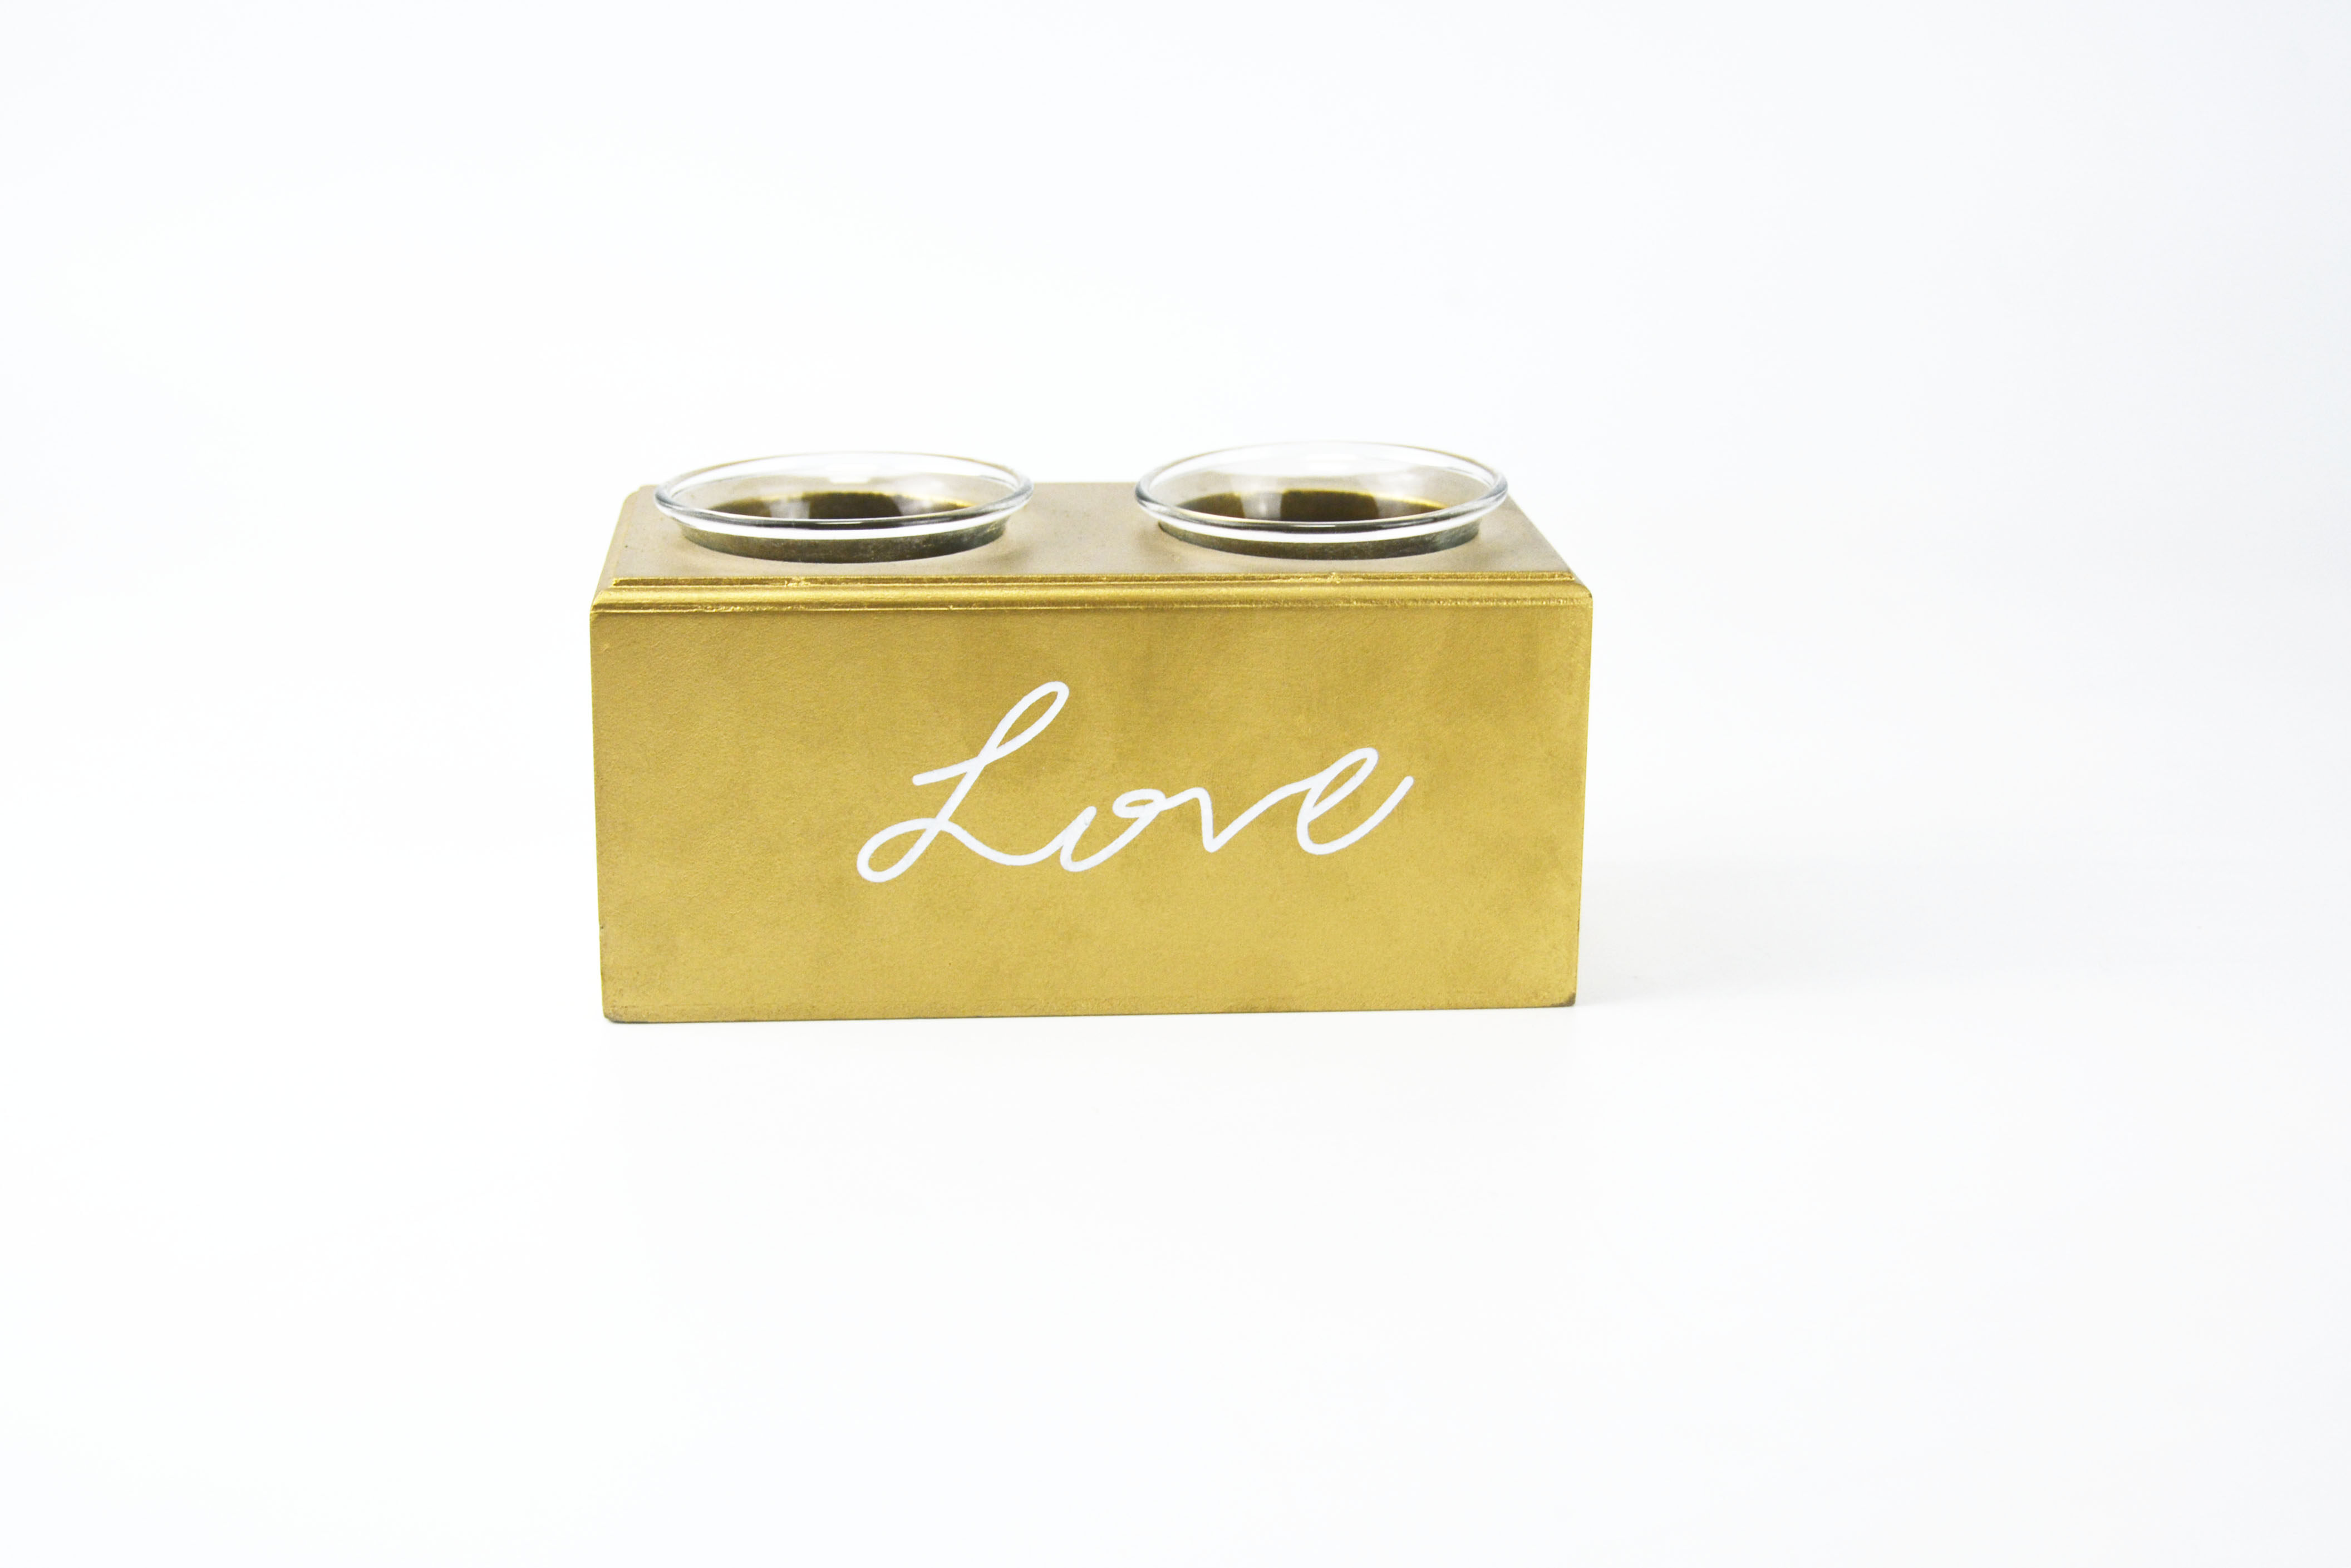 Wooden candle holder printed with exquisite gold color lighting candles and illuminating rooms